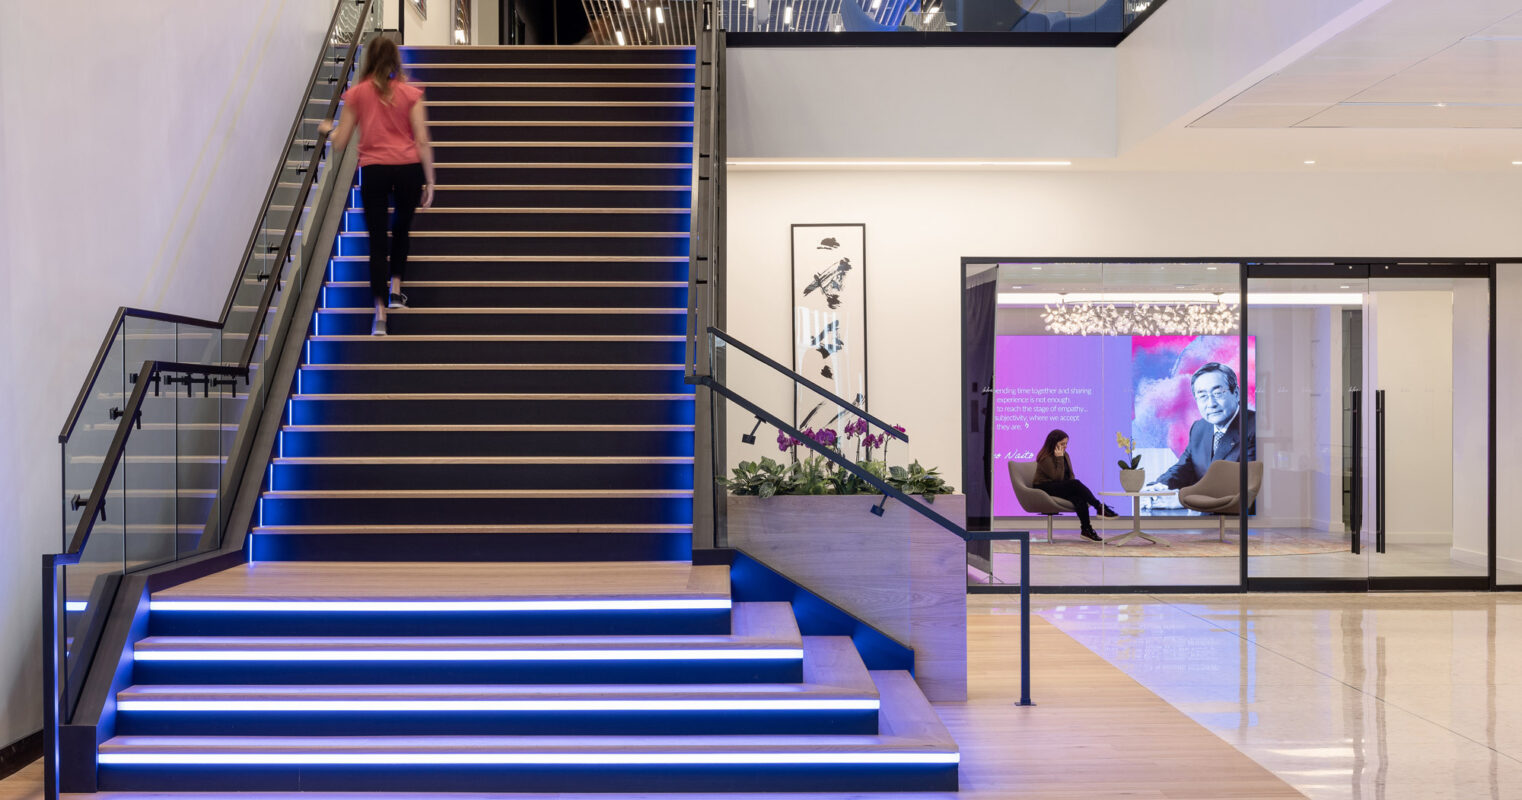 Modern office lobby featuring illuminated blue stair risers, creating a focal point. The stairs lead to a bright, open mezzanine with people casually interacting by a digital display wall, reflecting a dynamic and technologically-integrated workspace.